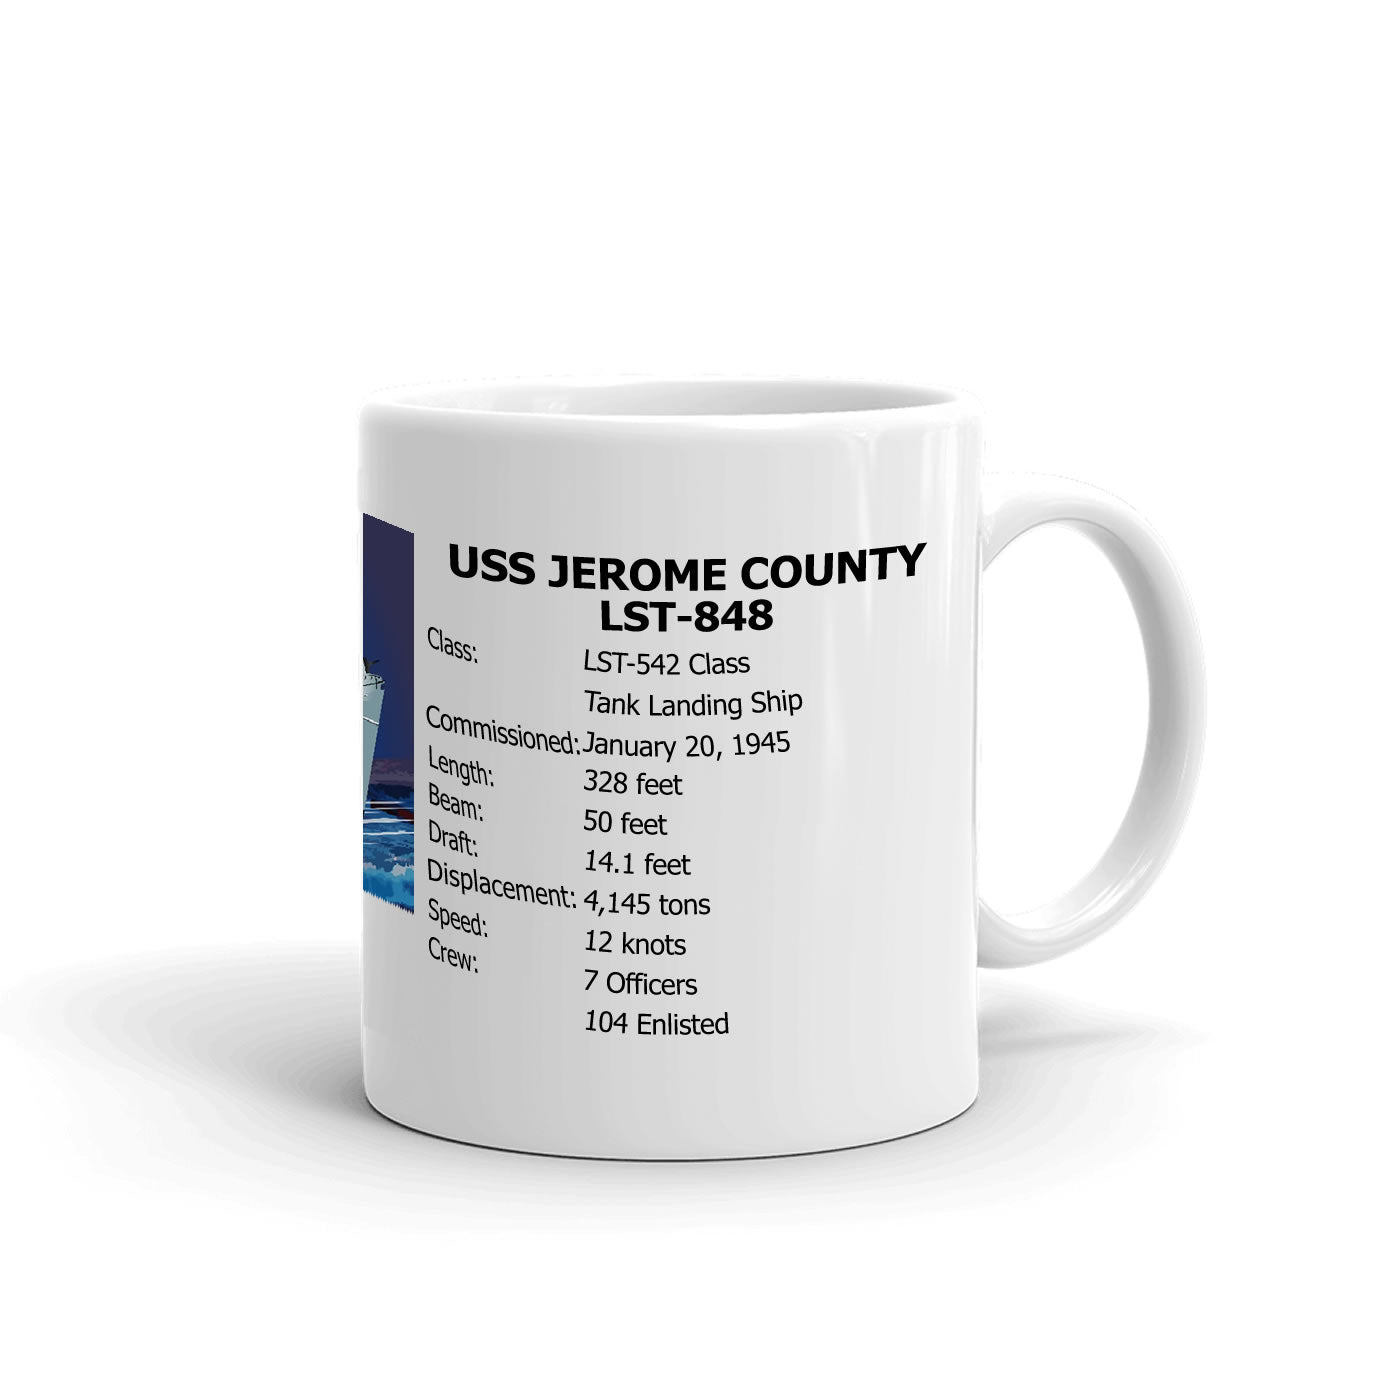 USS Jerome County LST-848 Coffee Cup Mug Right Handle